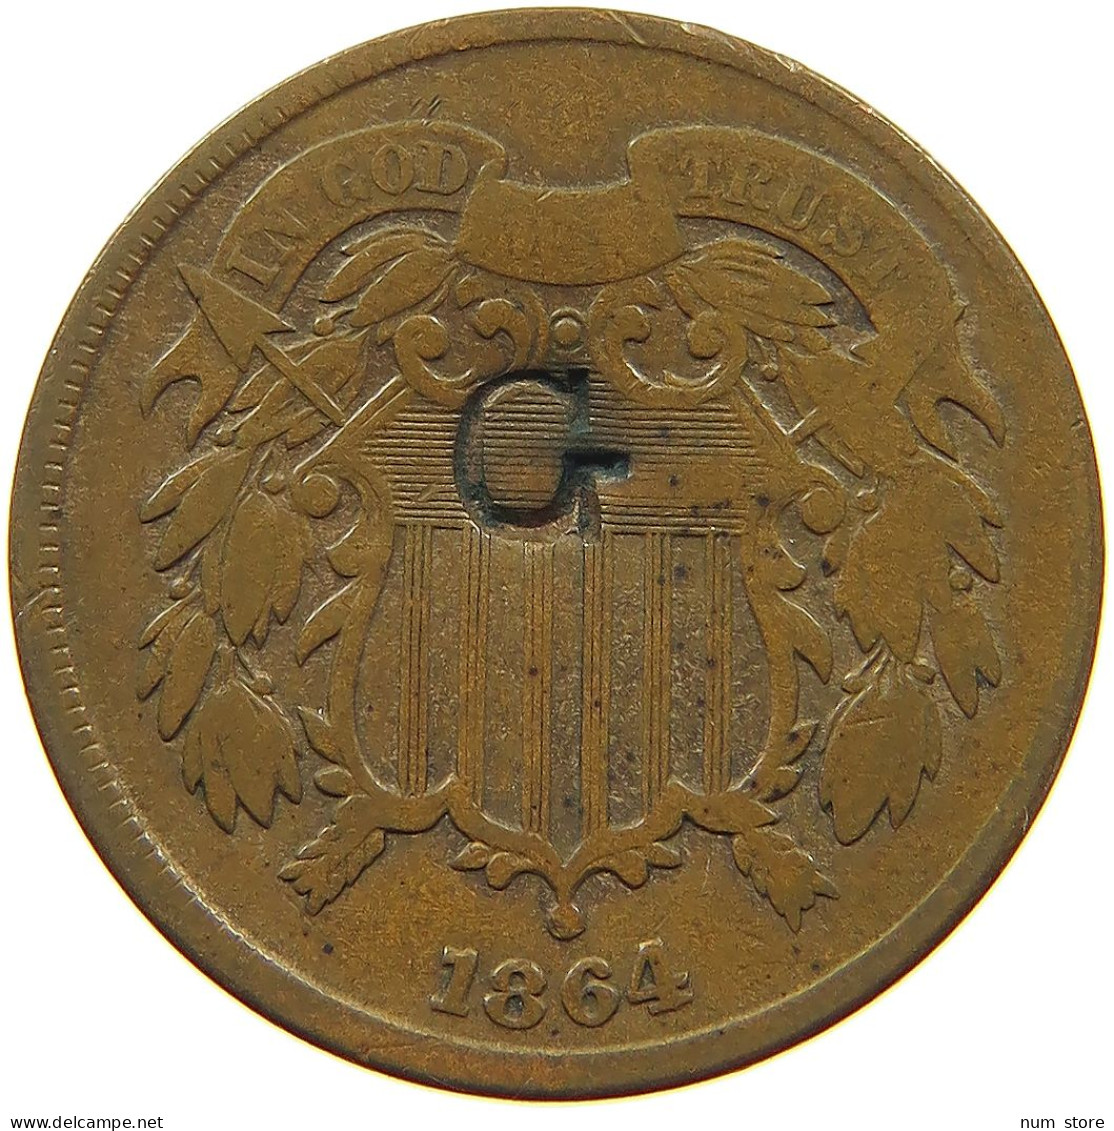 UNITED STATES OF AMERICA 2 CENTS 1864 COUNTERMARKED G #s076 0369 - 2, 3 & 20 Cents